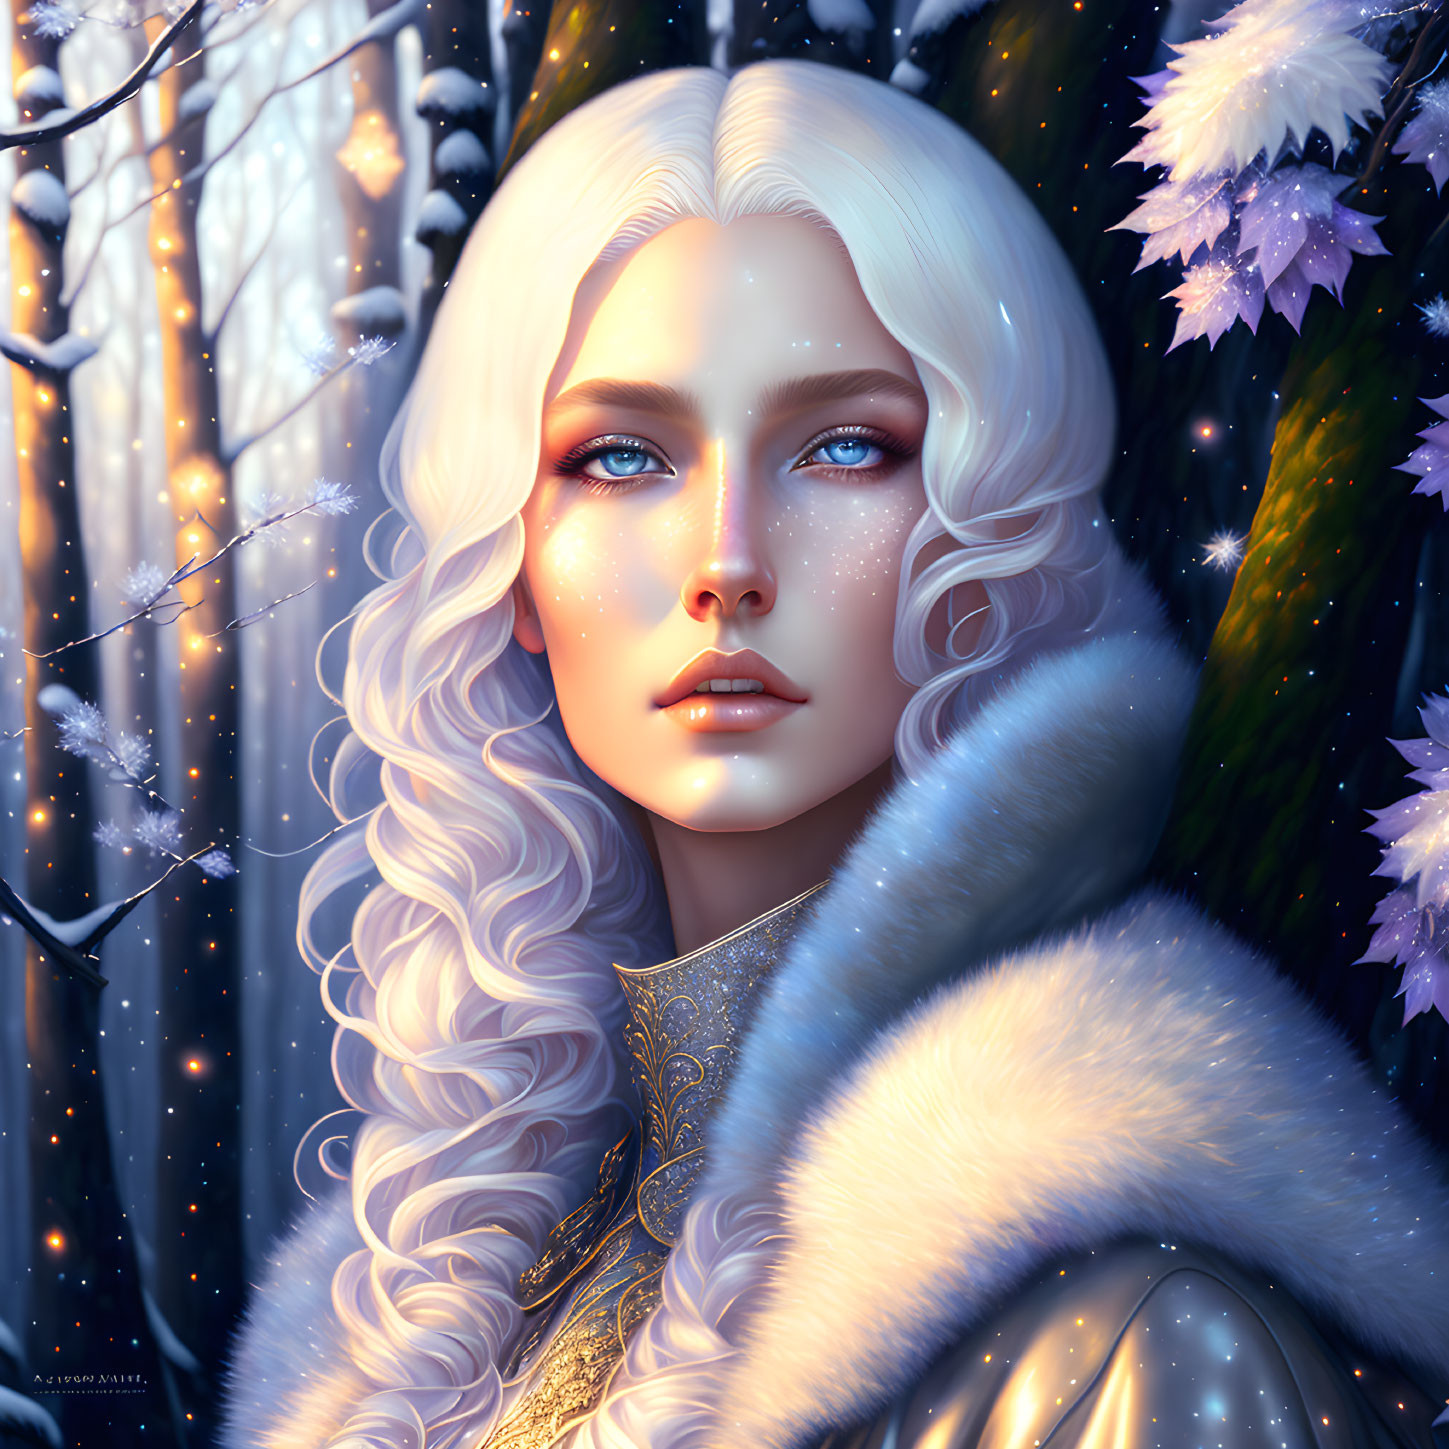 Pale-skinned person with white hair in winter scene with blue eyes, snowflakes, and fur